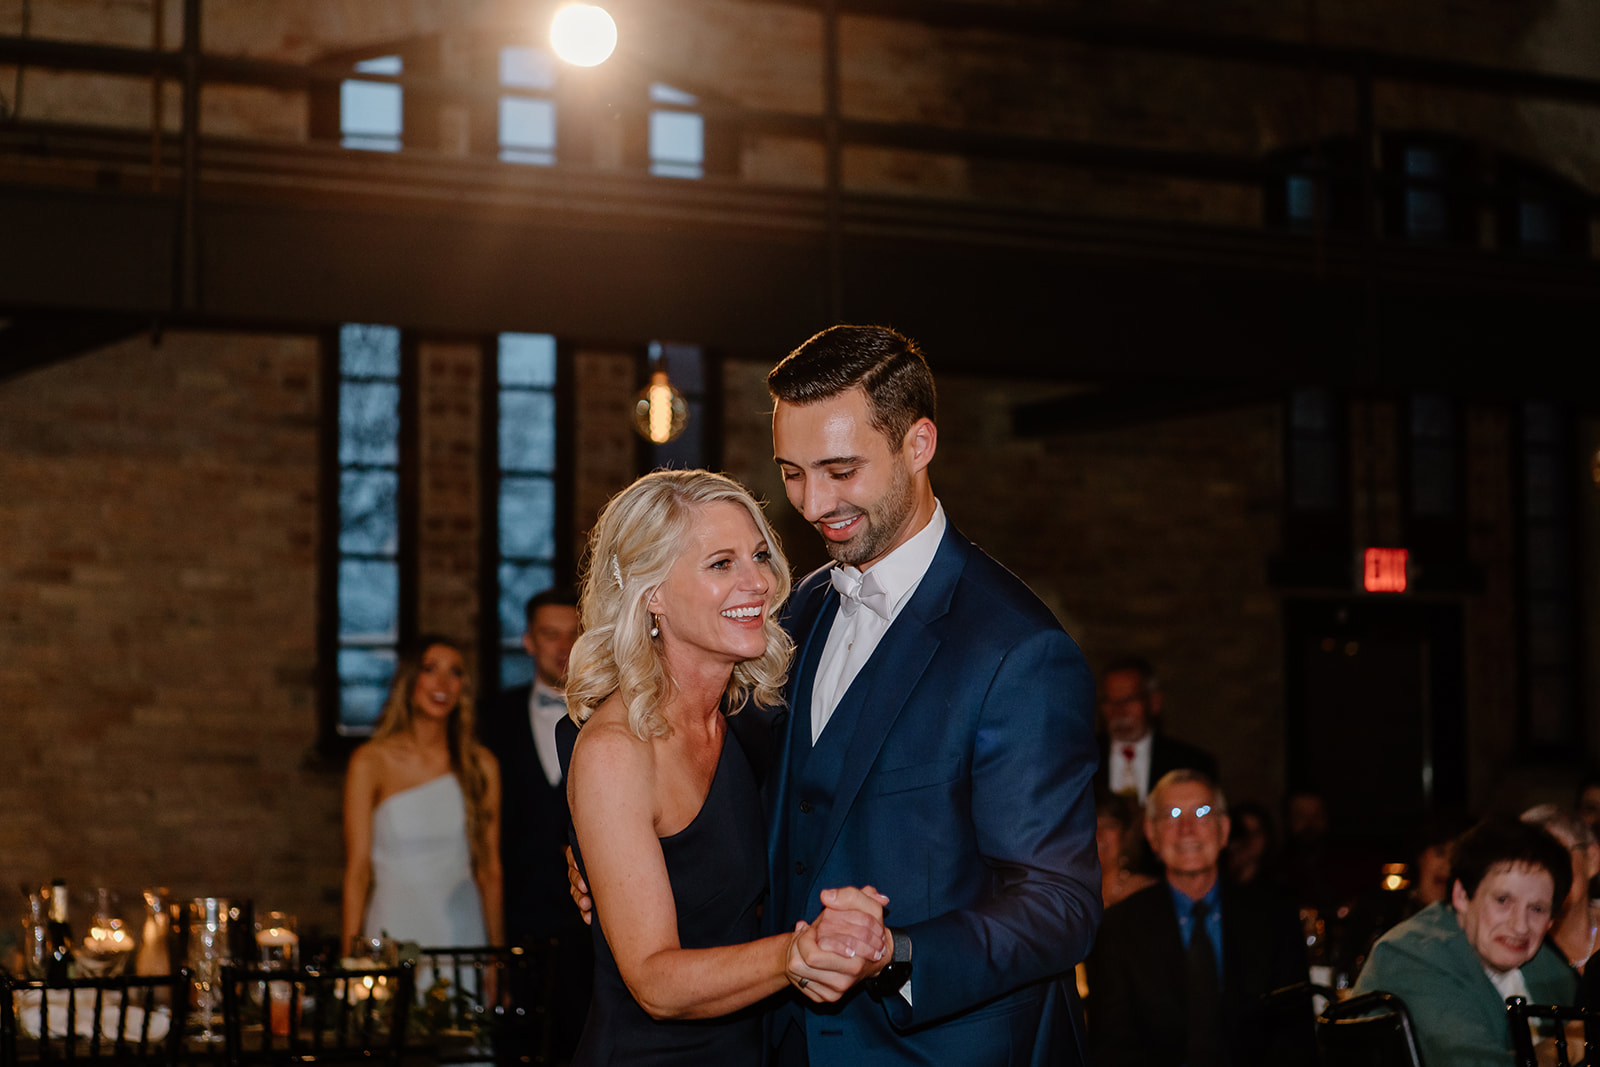 Mother of the bride dances with her new son in law.